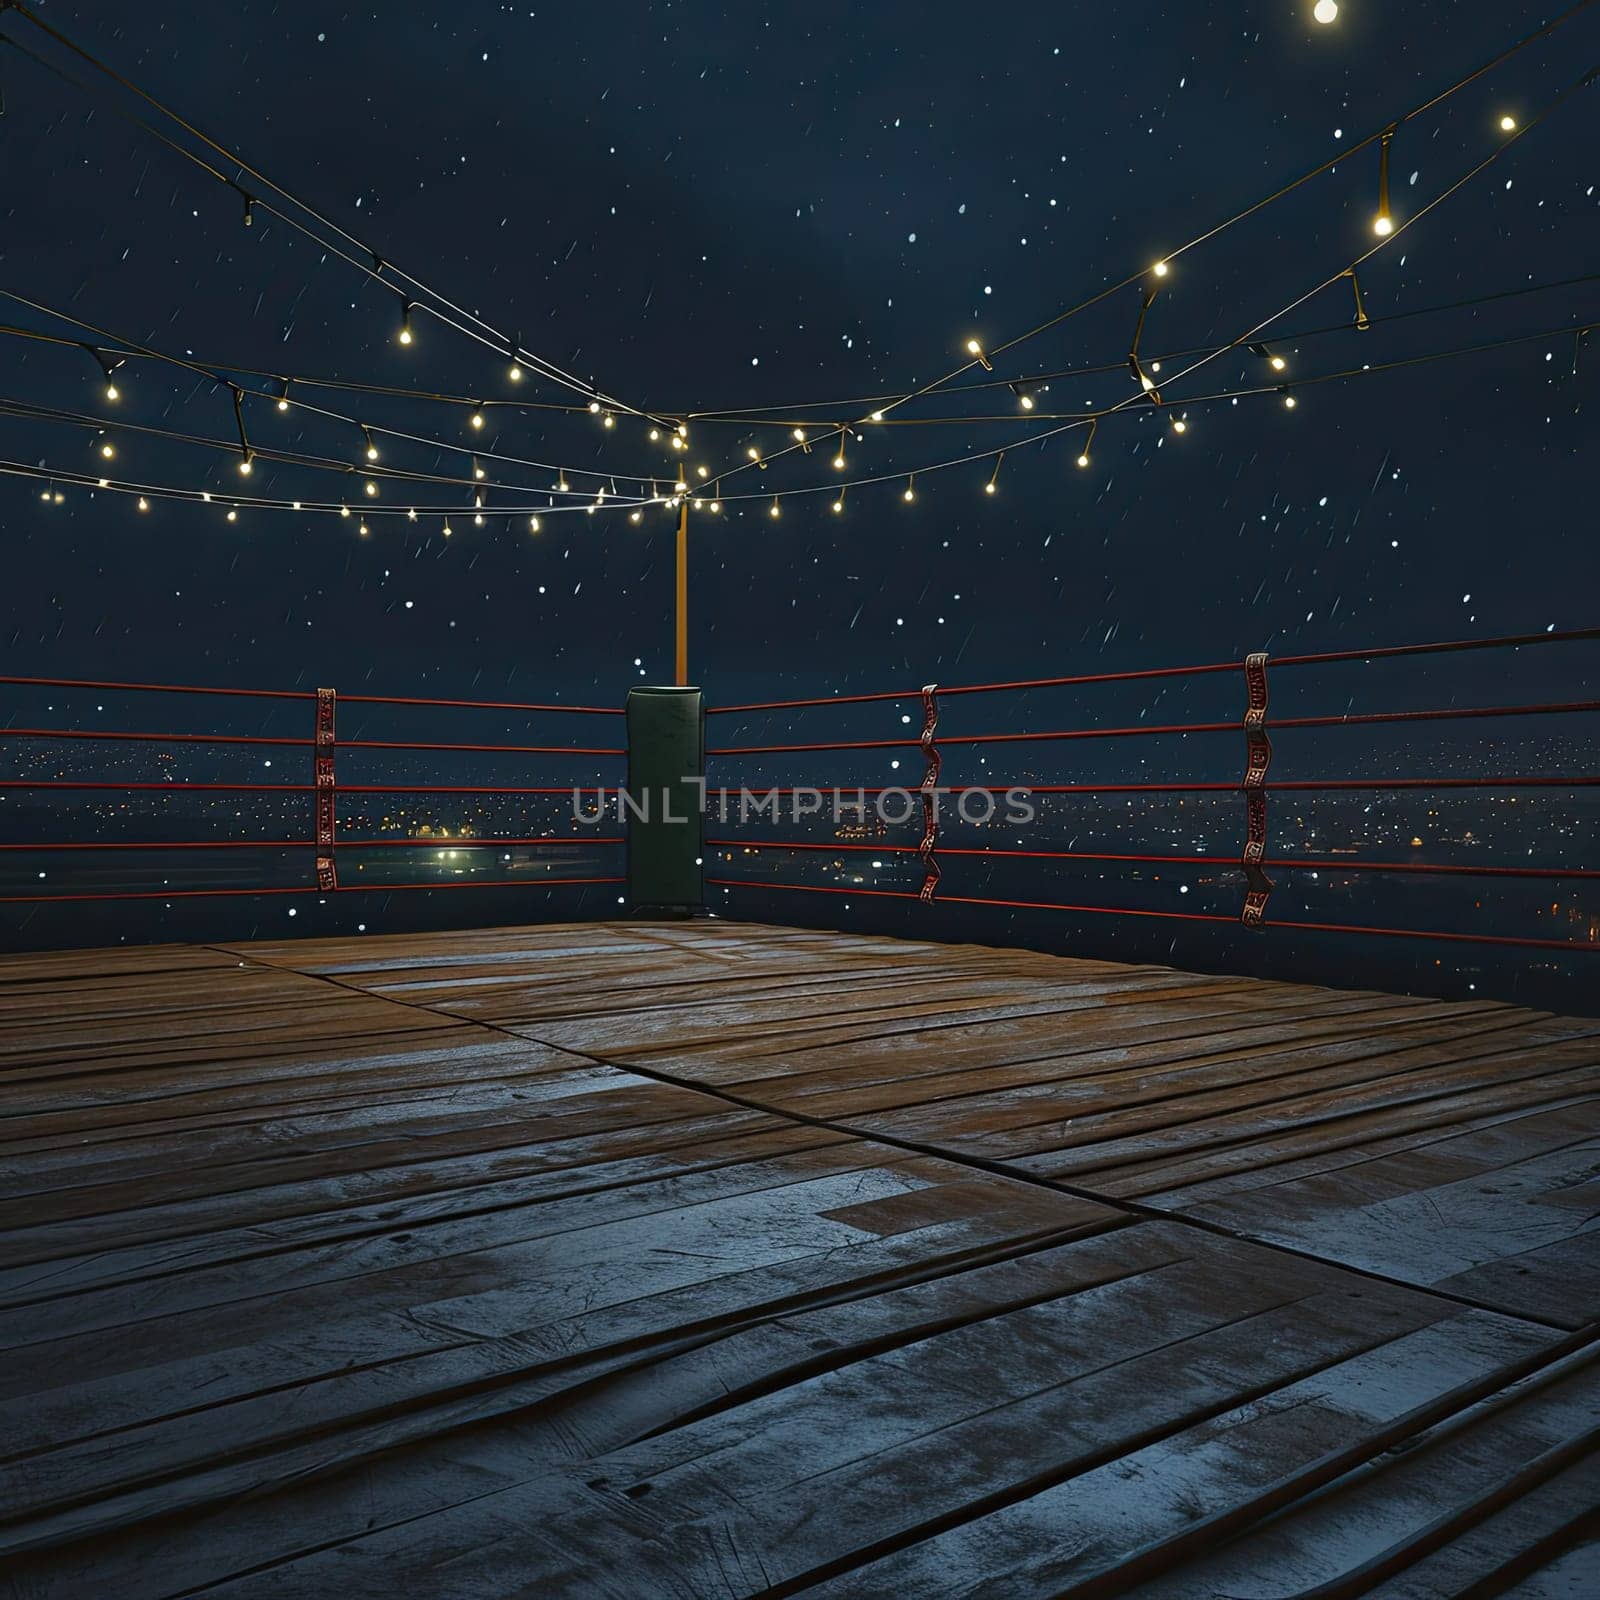 A photo capturing a wooden deck adorned with lights strung across, creating a warm and inviting atmosphere.